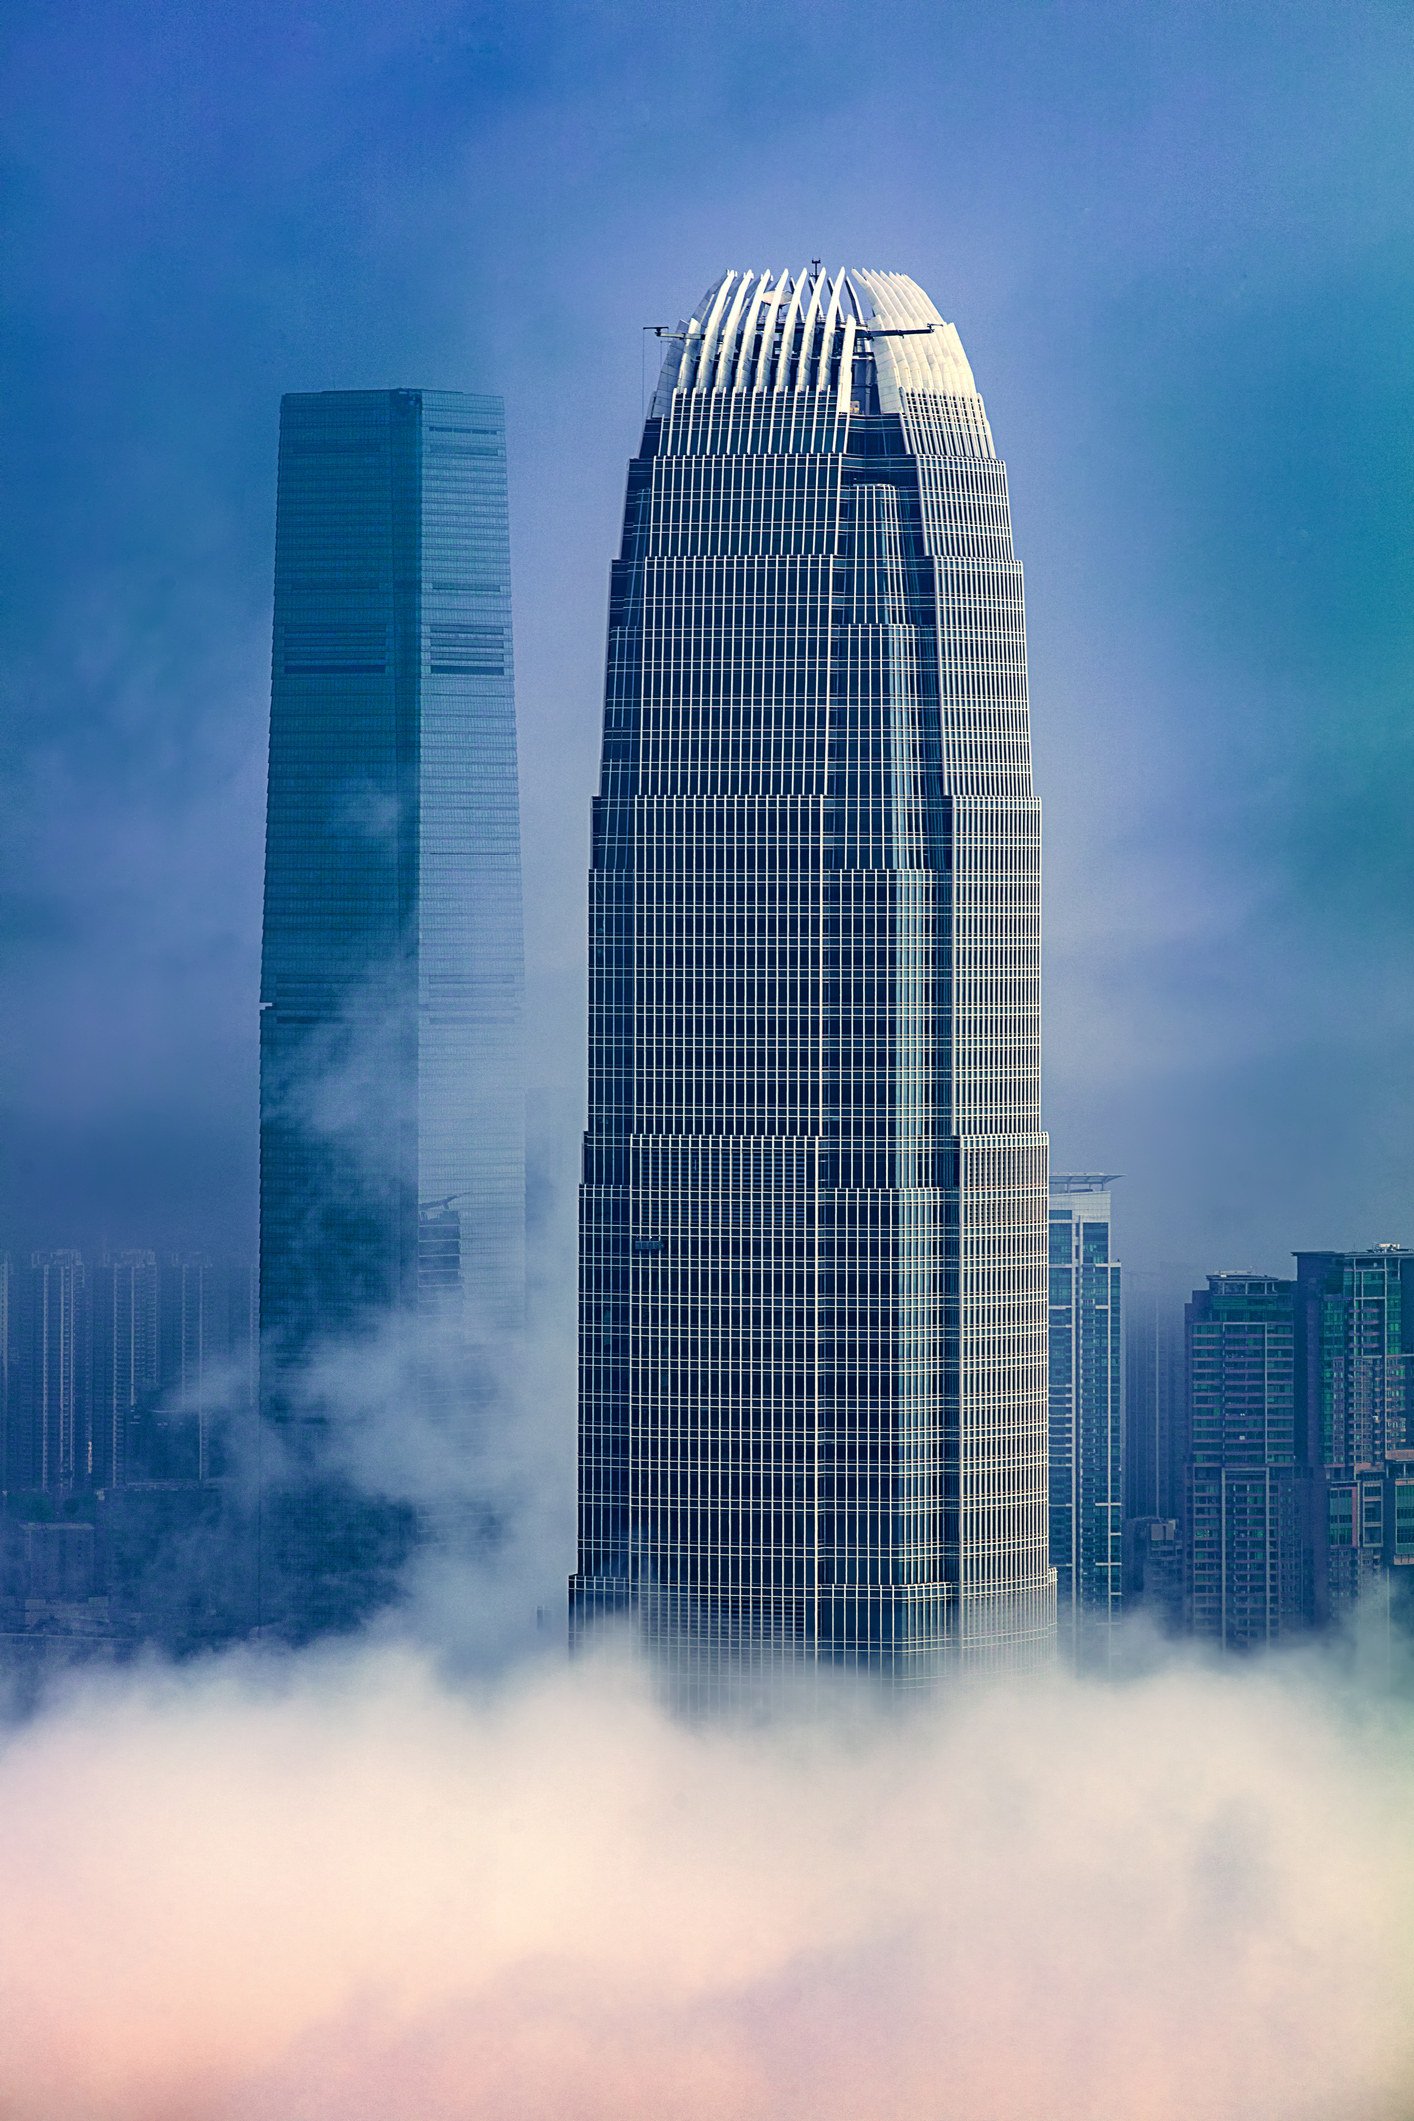 The tops of the IFC (International Finance Centre, right) and ICC (International Commerce Centre), Hong Kong’s two tallest buildings in a city of thousands of skyscrapers. Photo: Getty Images